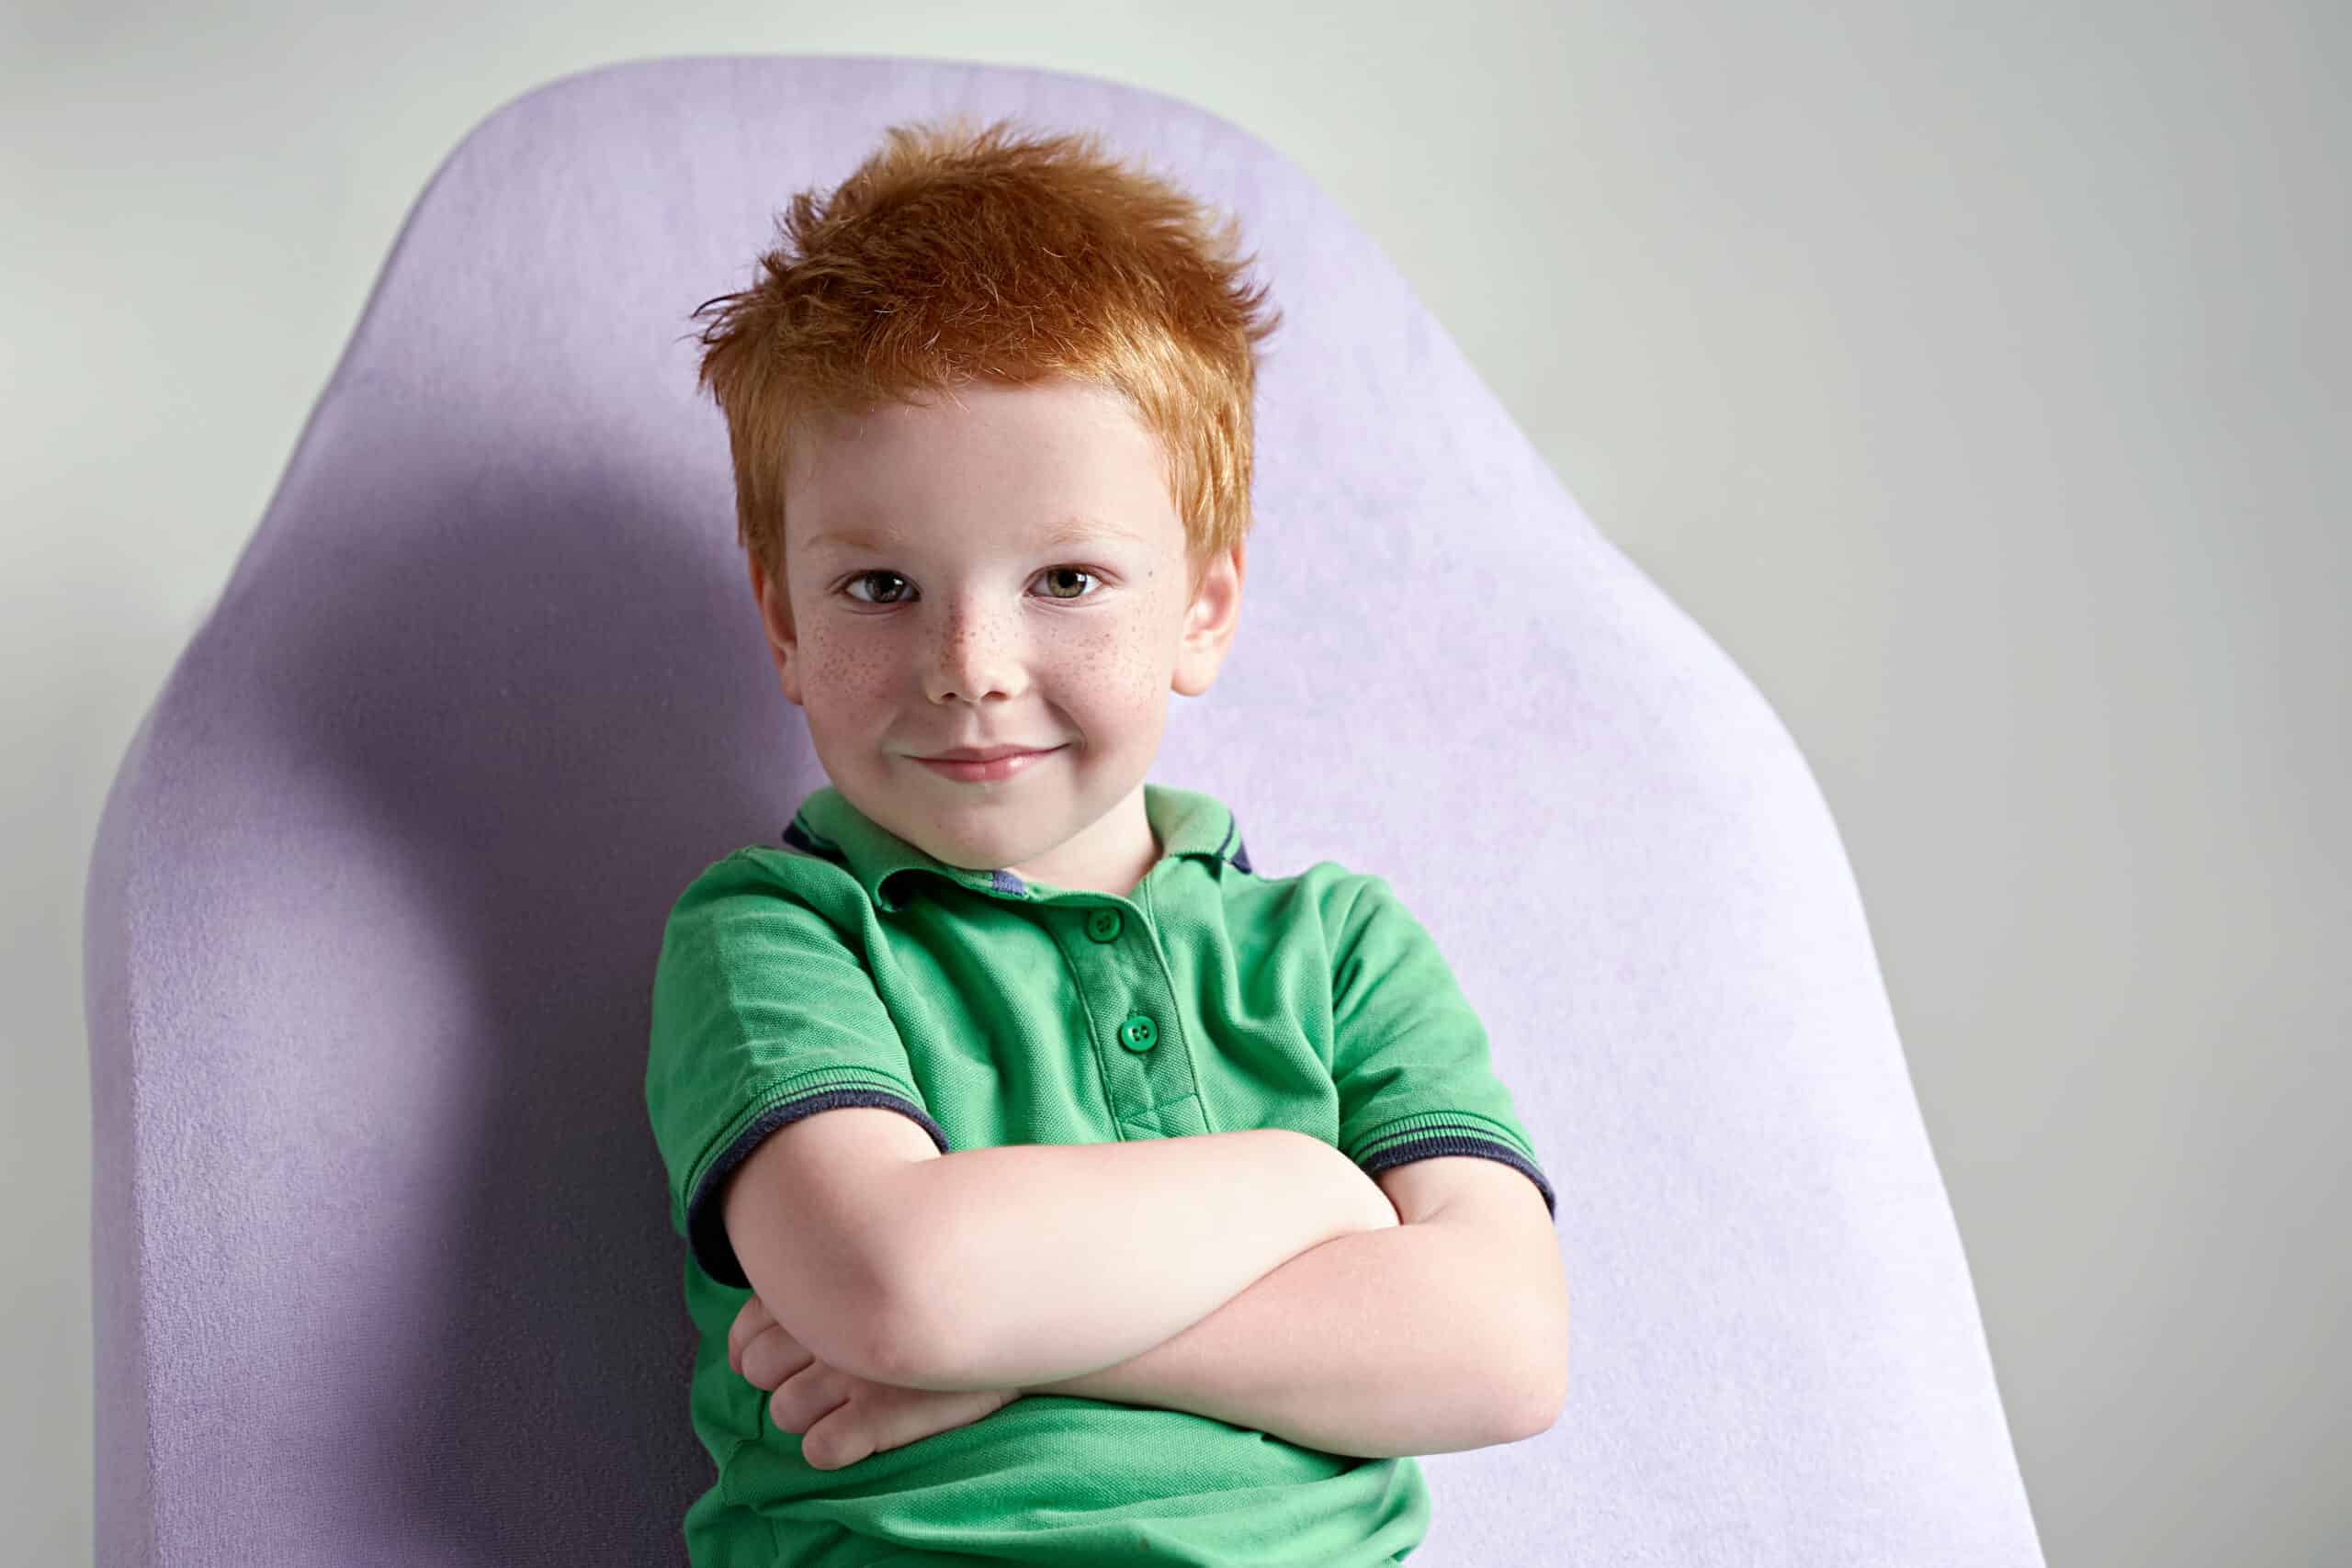 Cute red-haired freckled little boy wearing a green polo t-shirt sitting on a couch in a doctor's office waiting for a medical examination